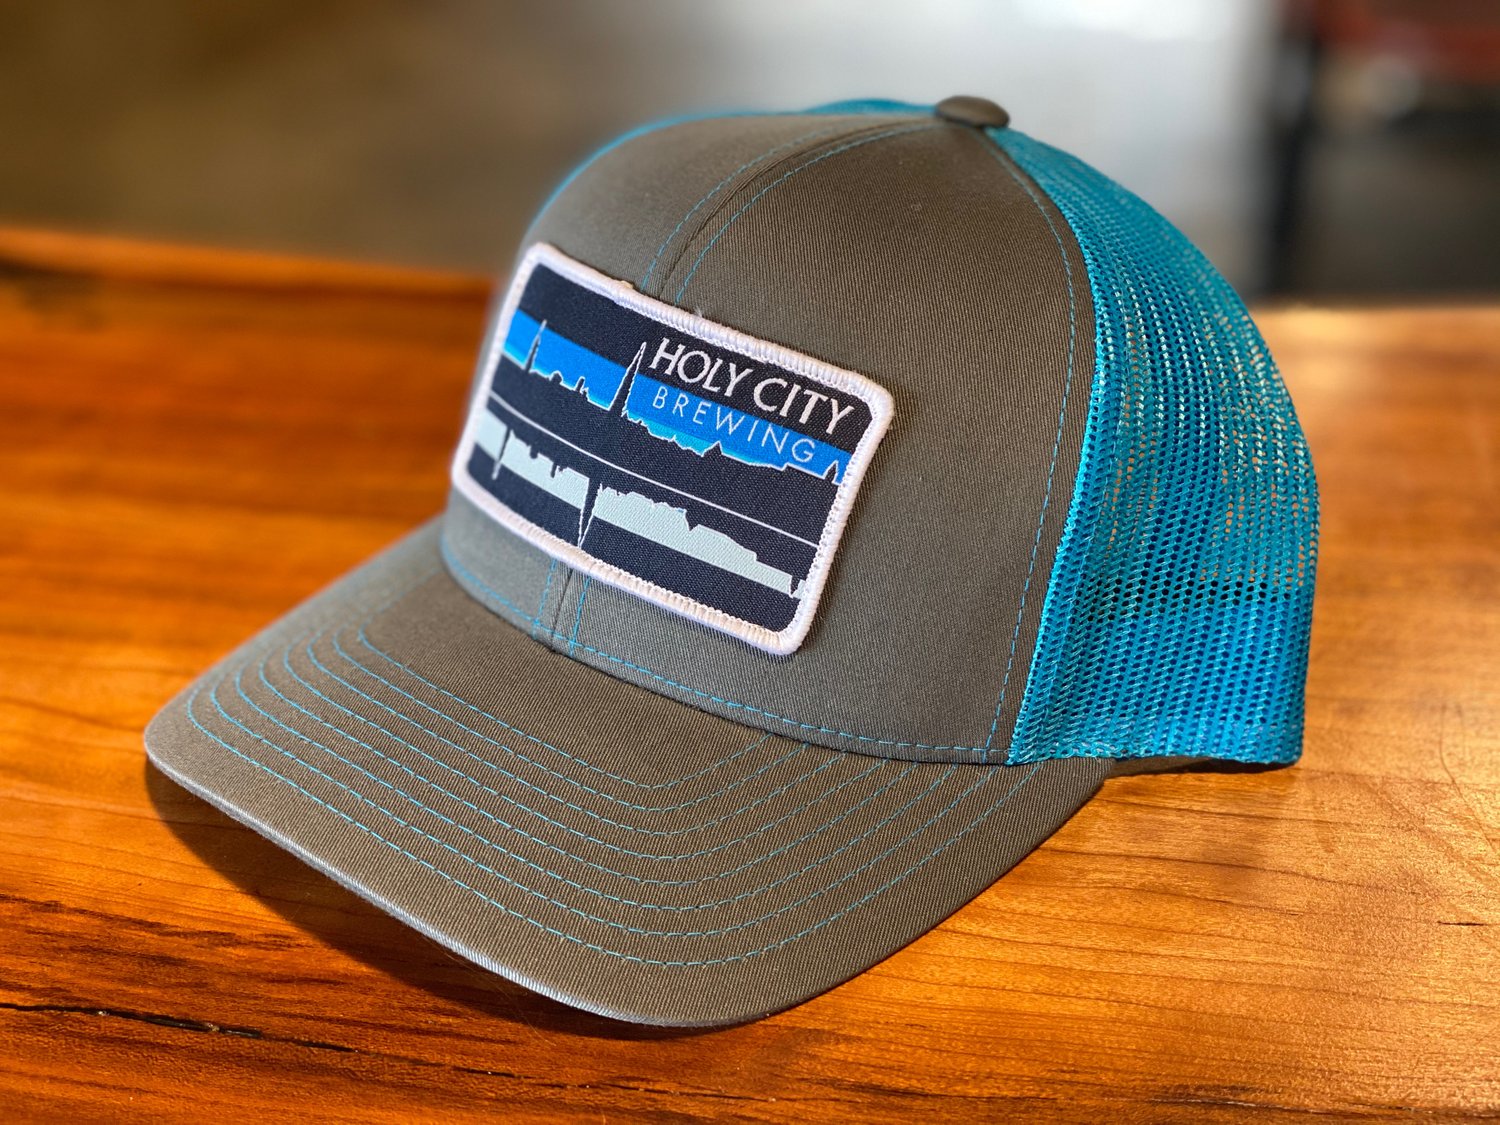 Stitch and Patch Trucker Hats